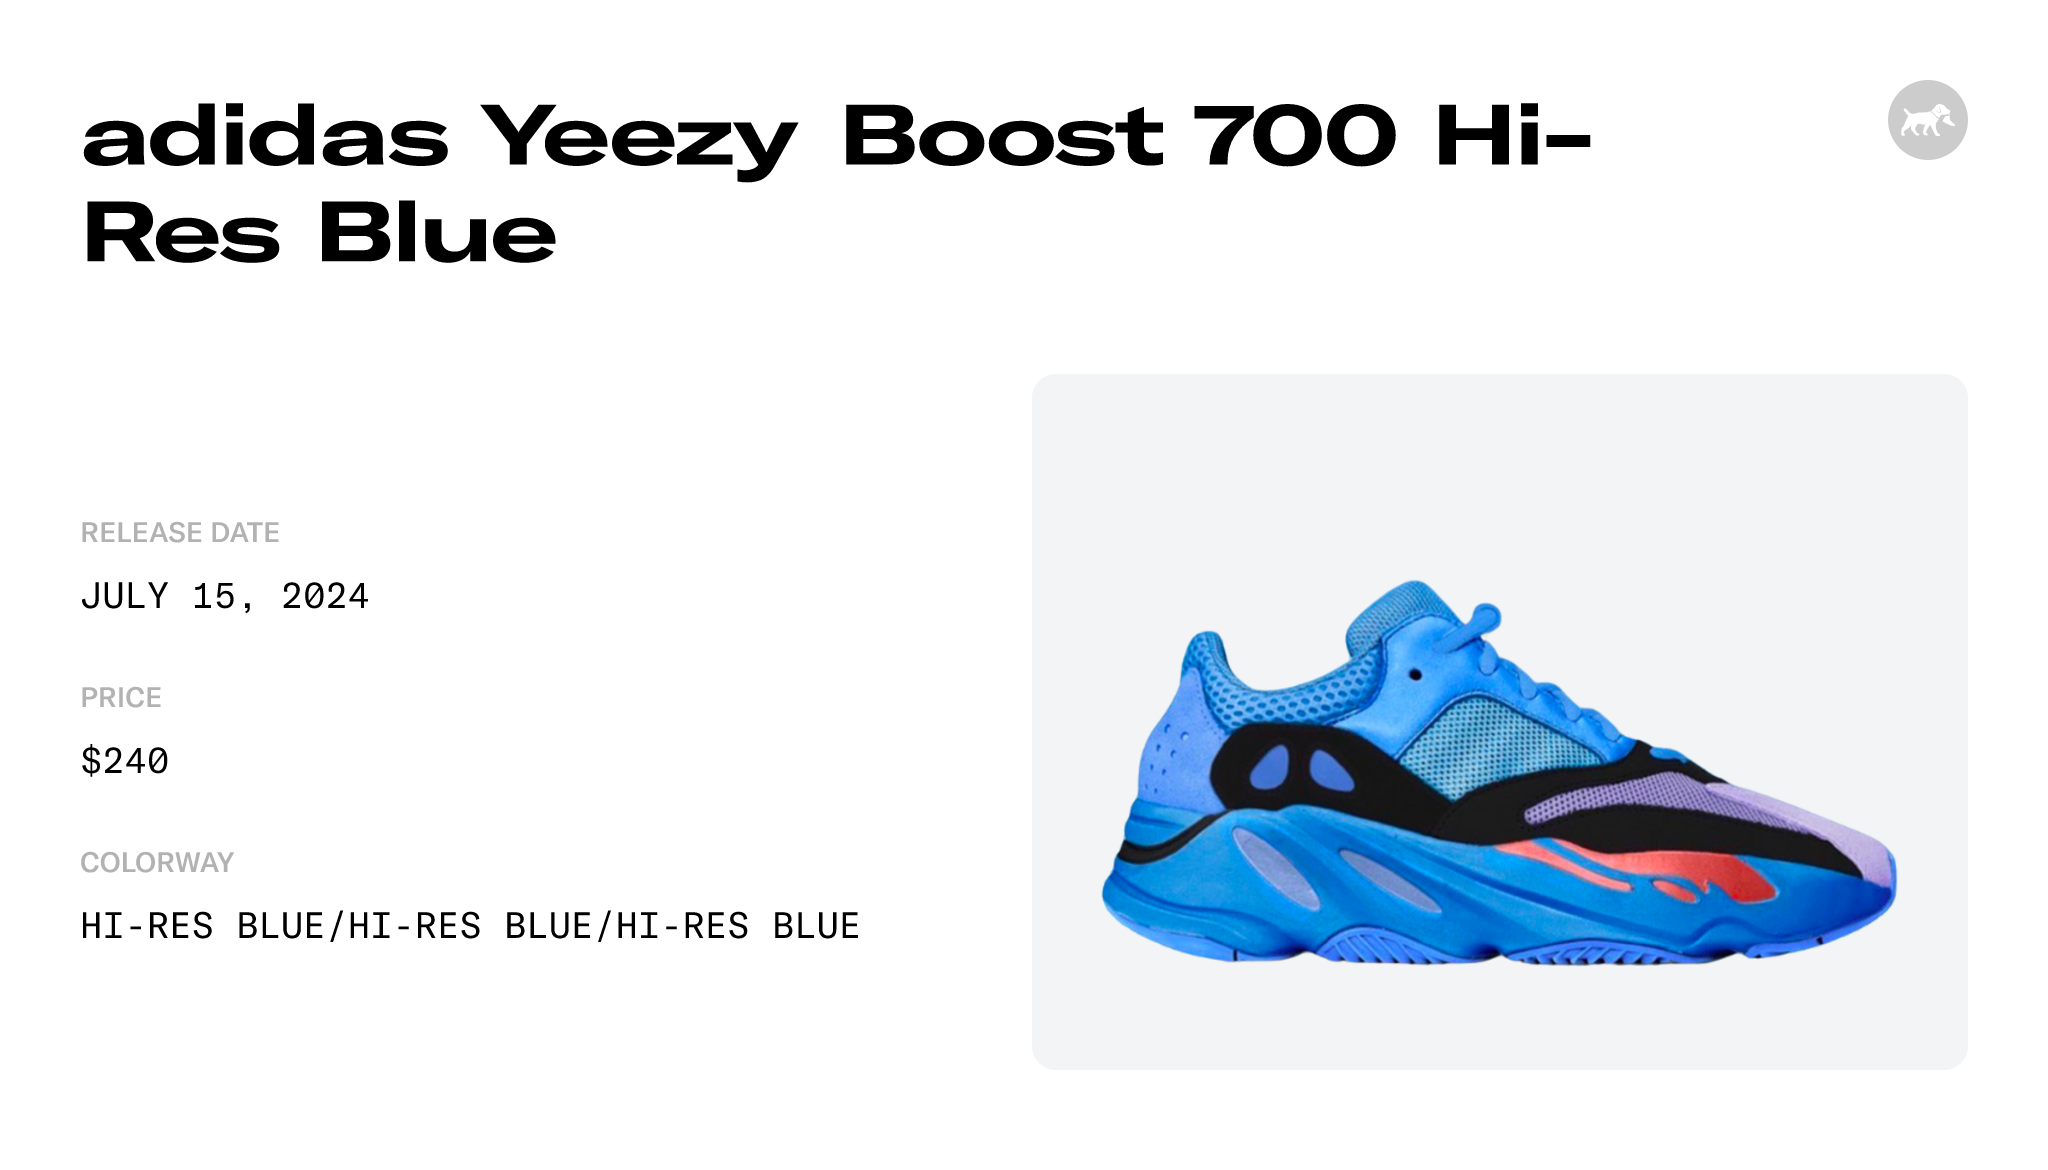 adidas Yeezy Boost 700 Hi-Res Blue - HP6674 Raffles and Release Date